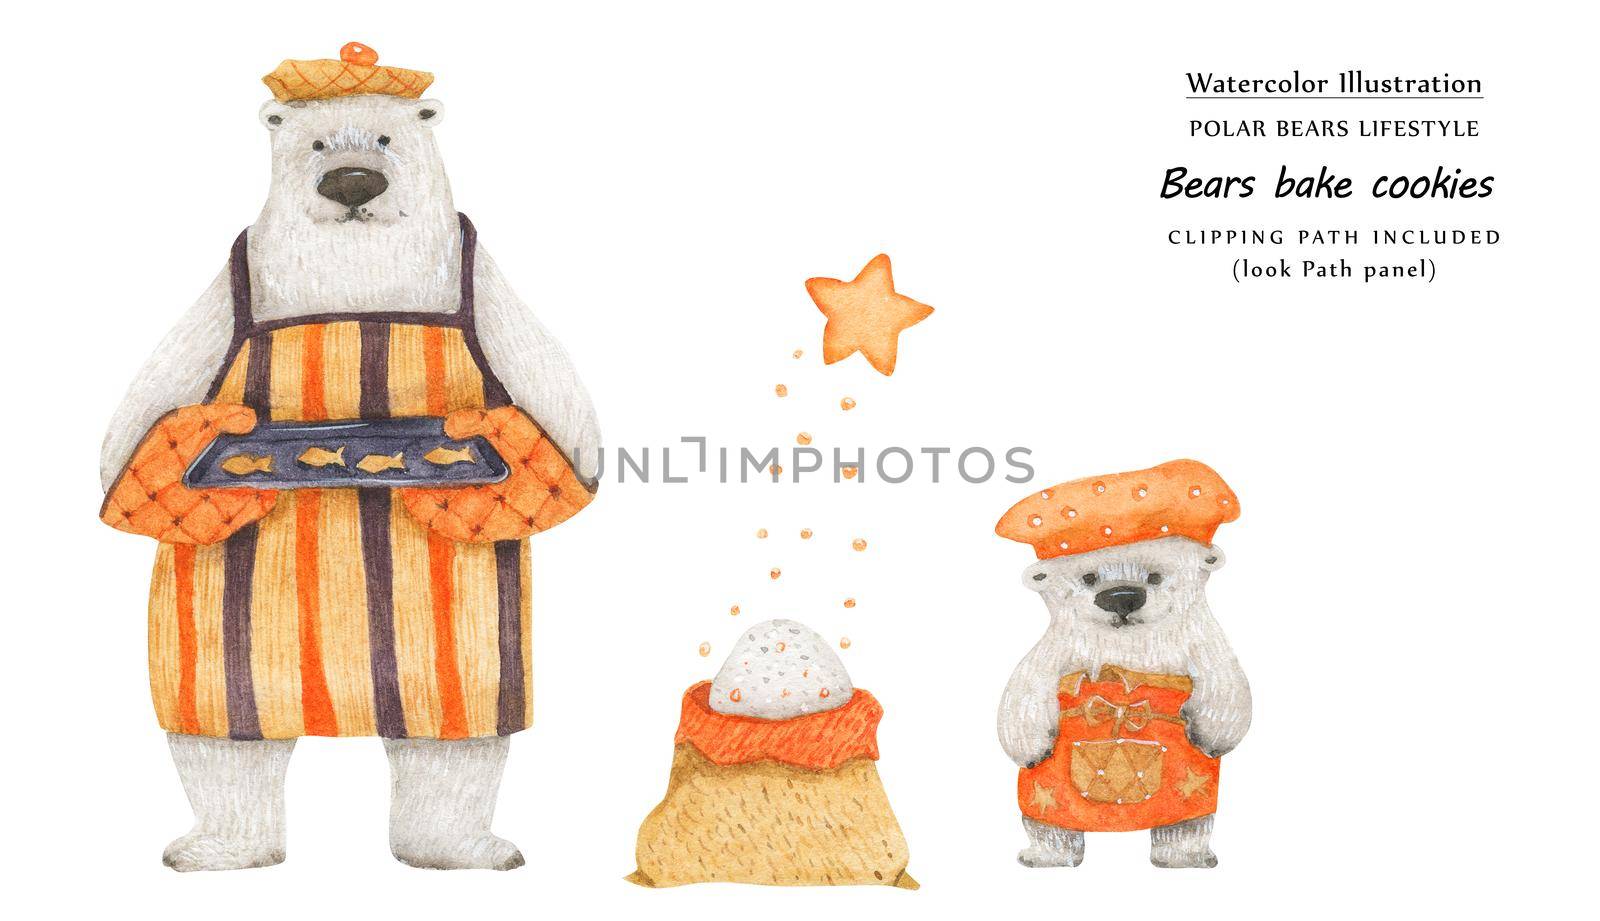 Bears bake homemede sugar cookies, close-up illustration by Xeniasnowstorm